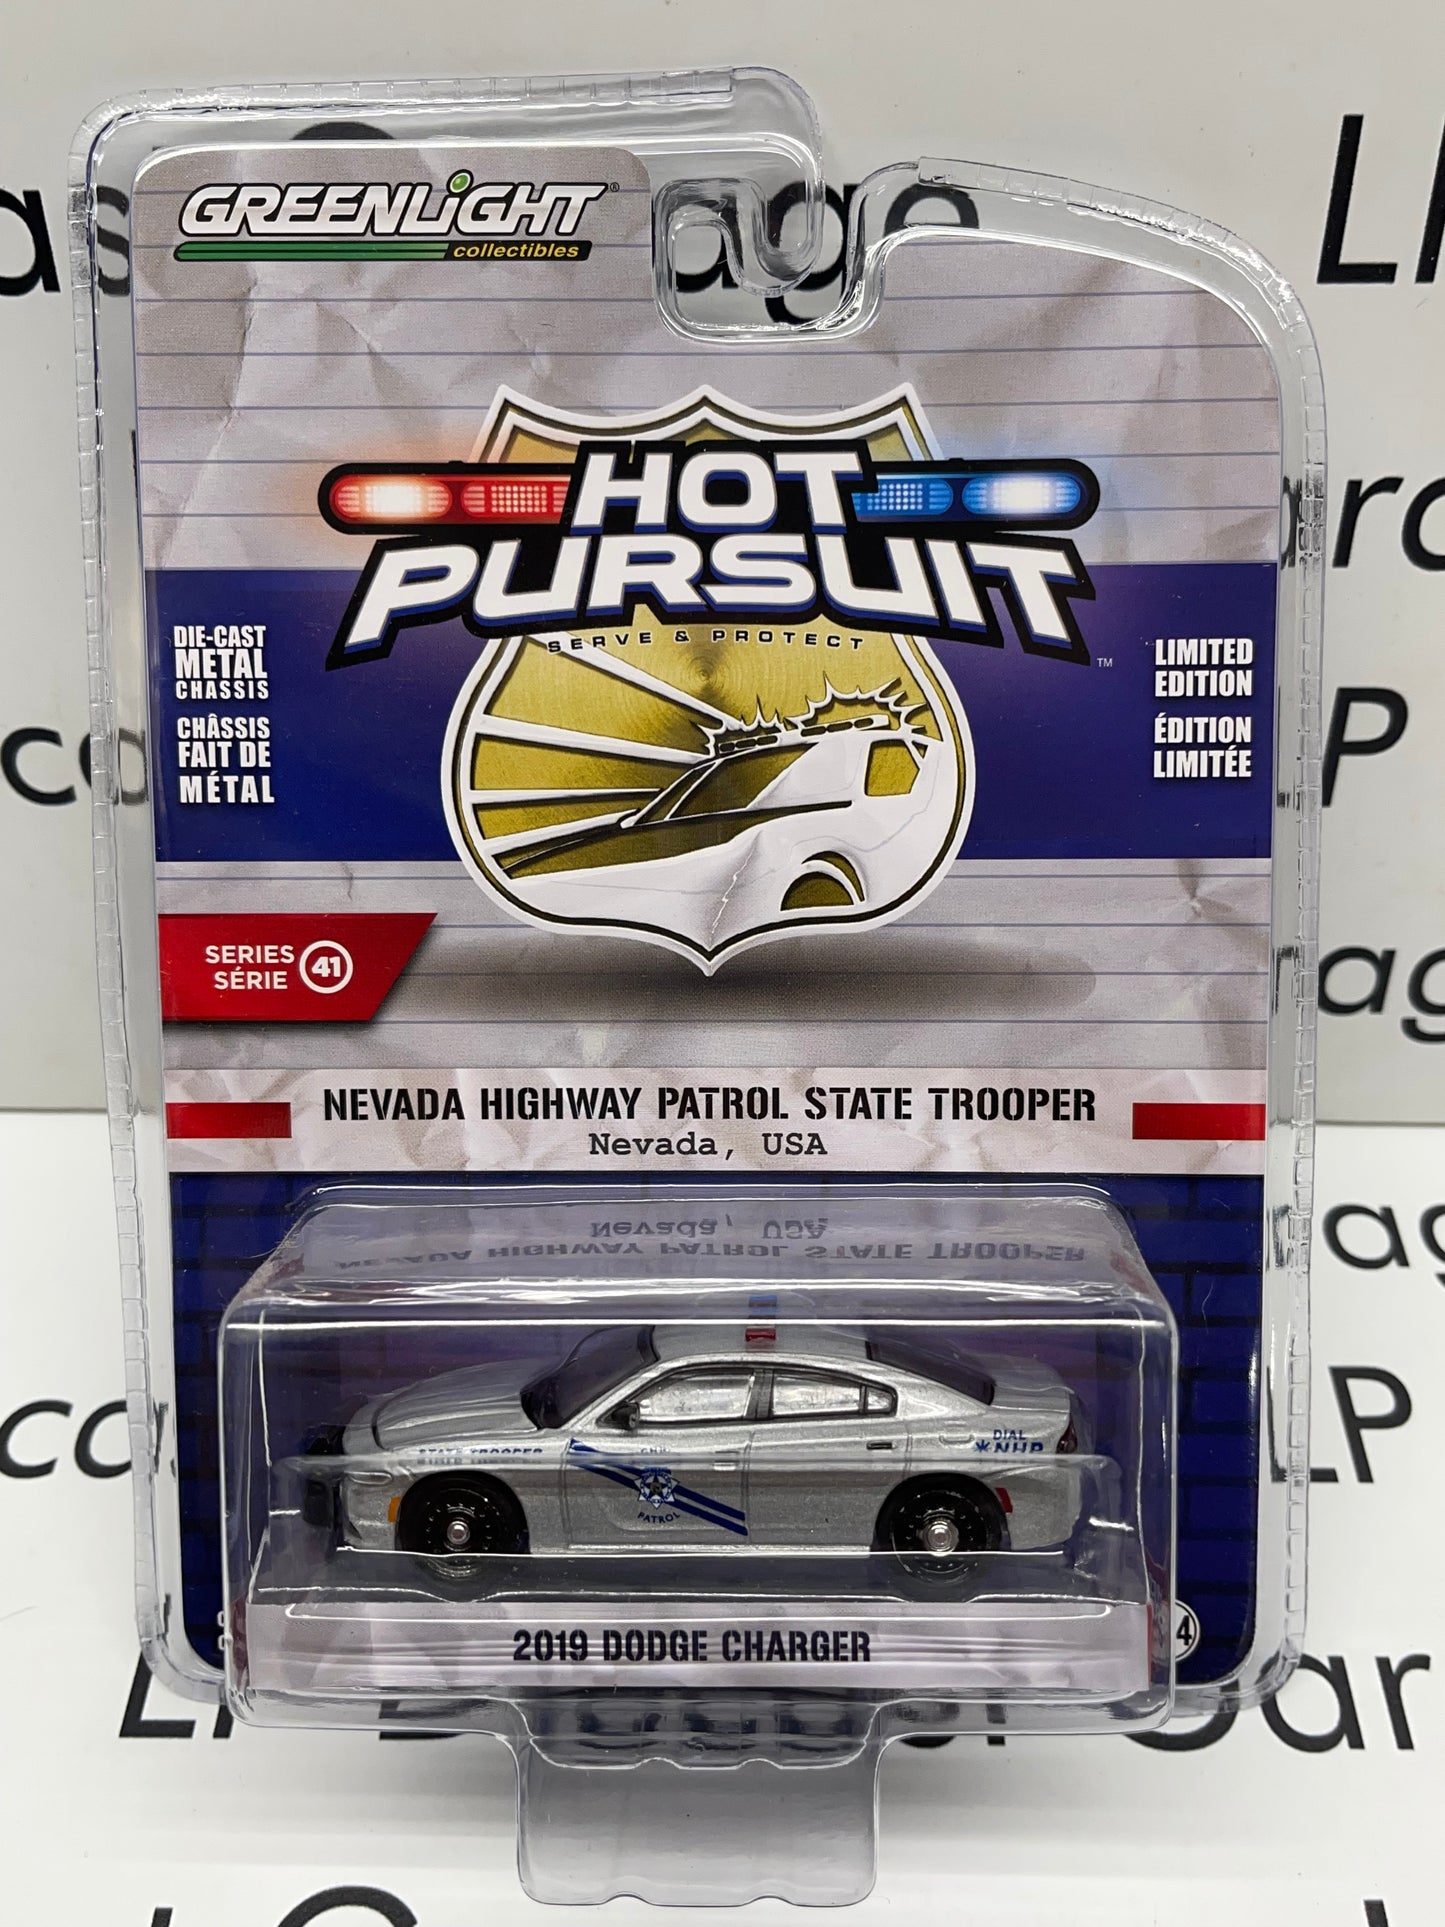 GREENLIGHT 2019 Dodge Charger Nevada Highway Patrol "Hot Pursuit" 1:64 Scale Diecast Car